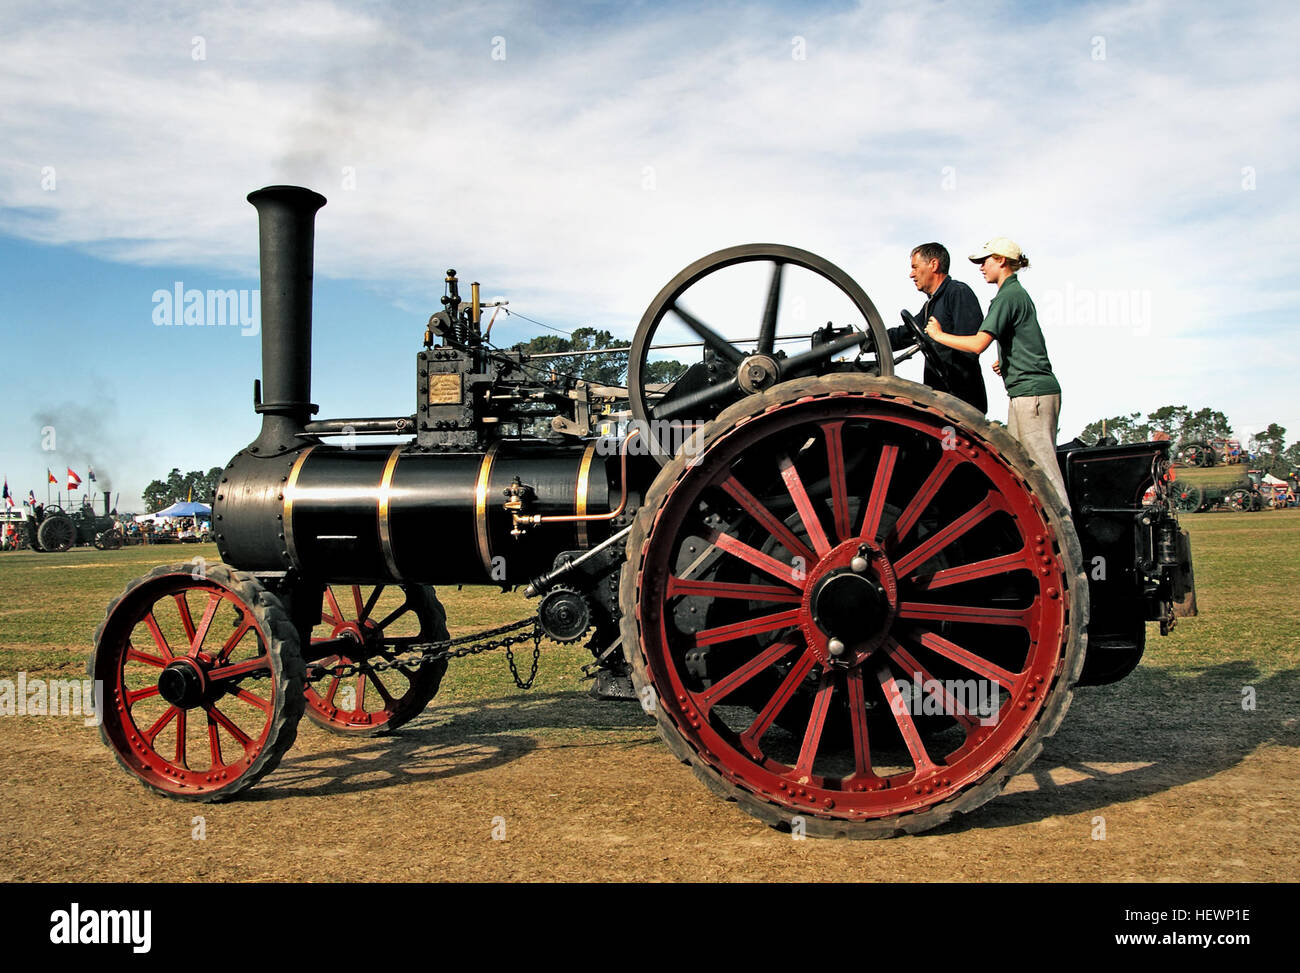 Charles Burrell &amp; Sons were builders of steam traction engines, agricultural machinery, steam trucks and steam tram engines. The company were based in Thetford, Norfolk and operated from the St Nicholas works on Minstergate and St Nicholas Street some of which survives today. Stock Photo